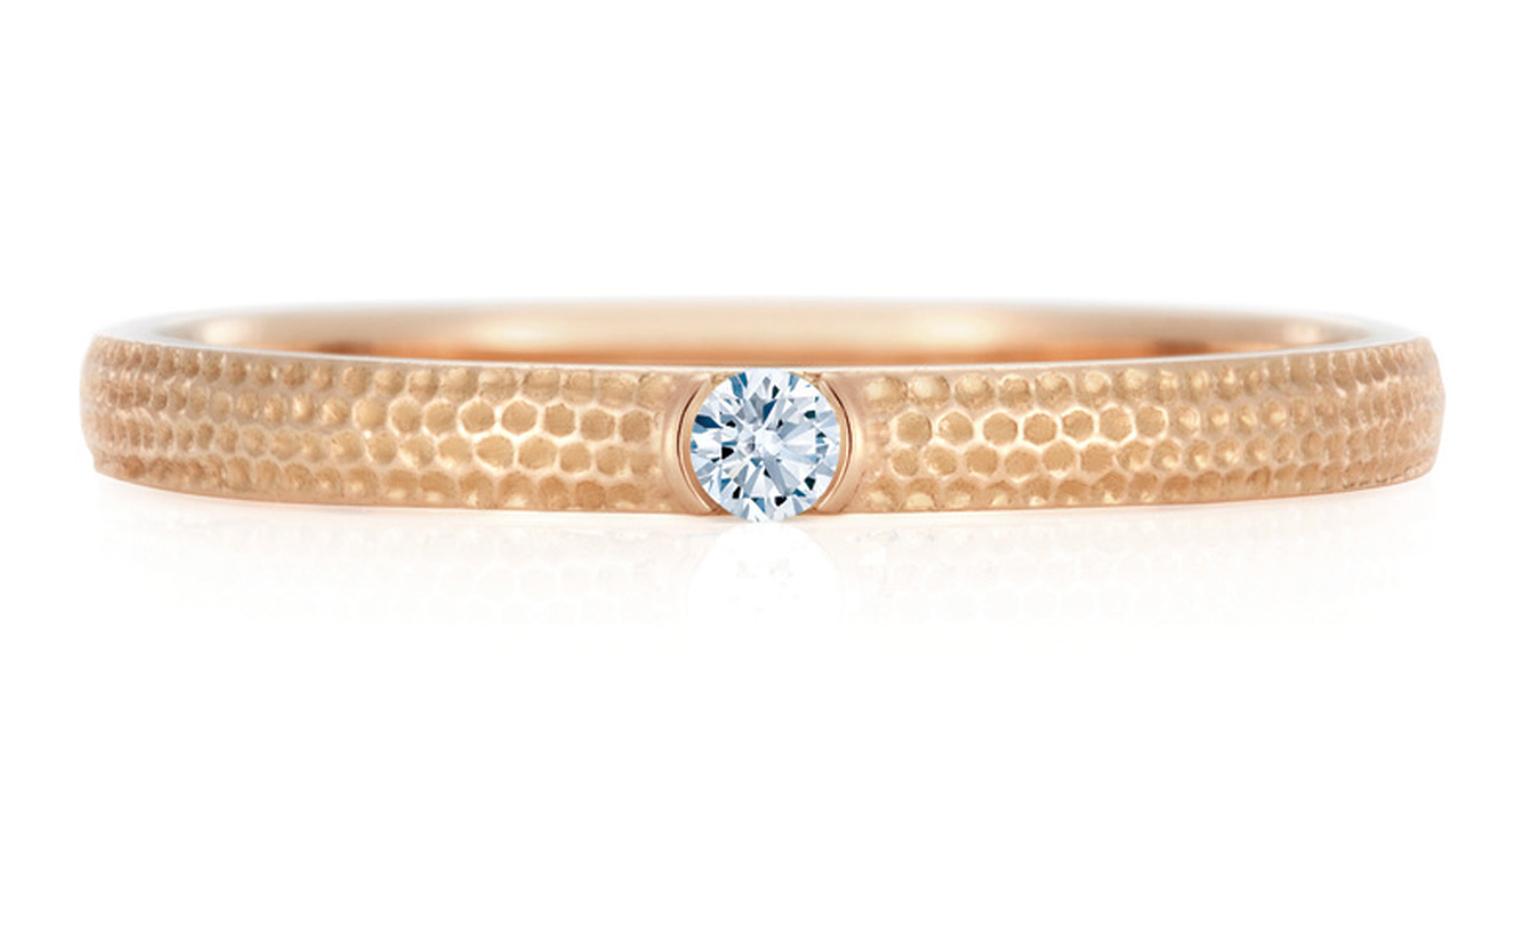 DE BEERS. Azulea Band, white diamond on pink gold, 0.03 toal carat weight. Price from £600.